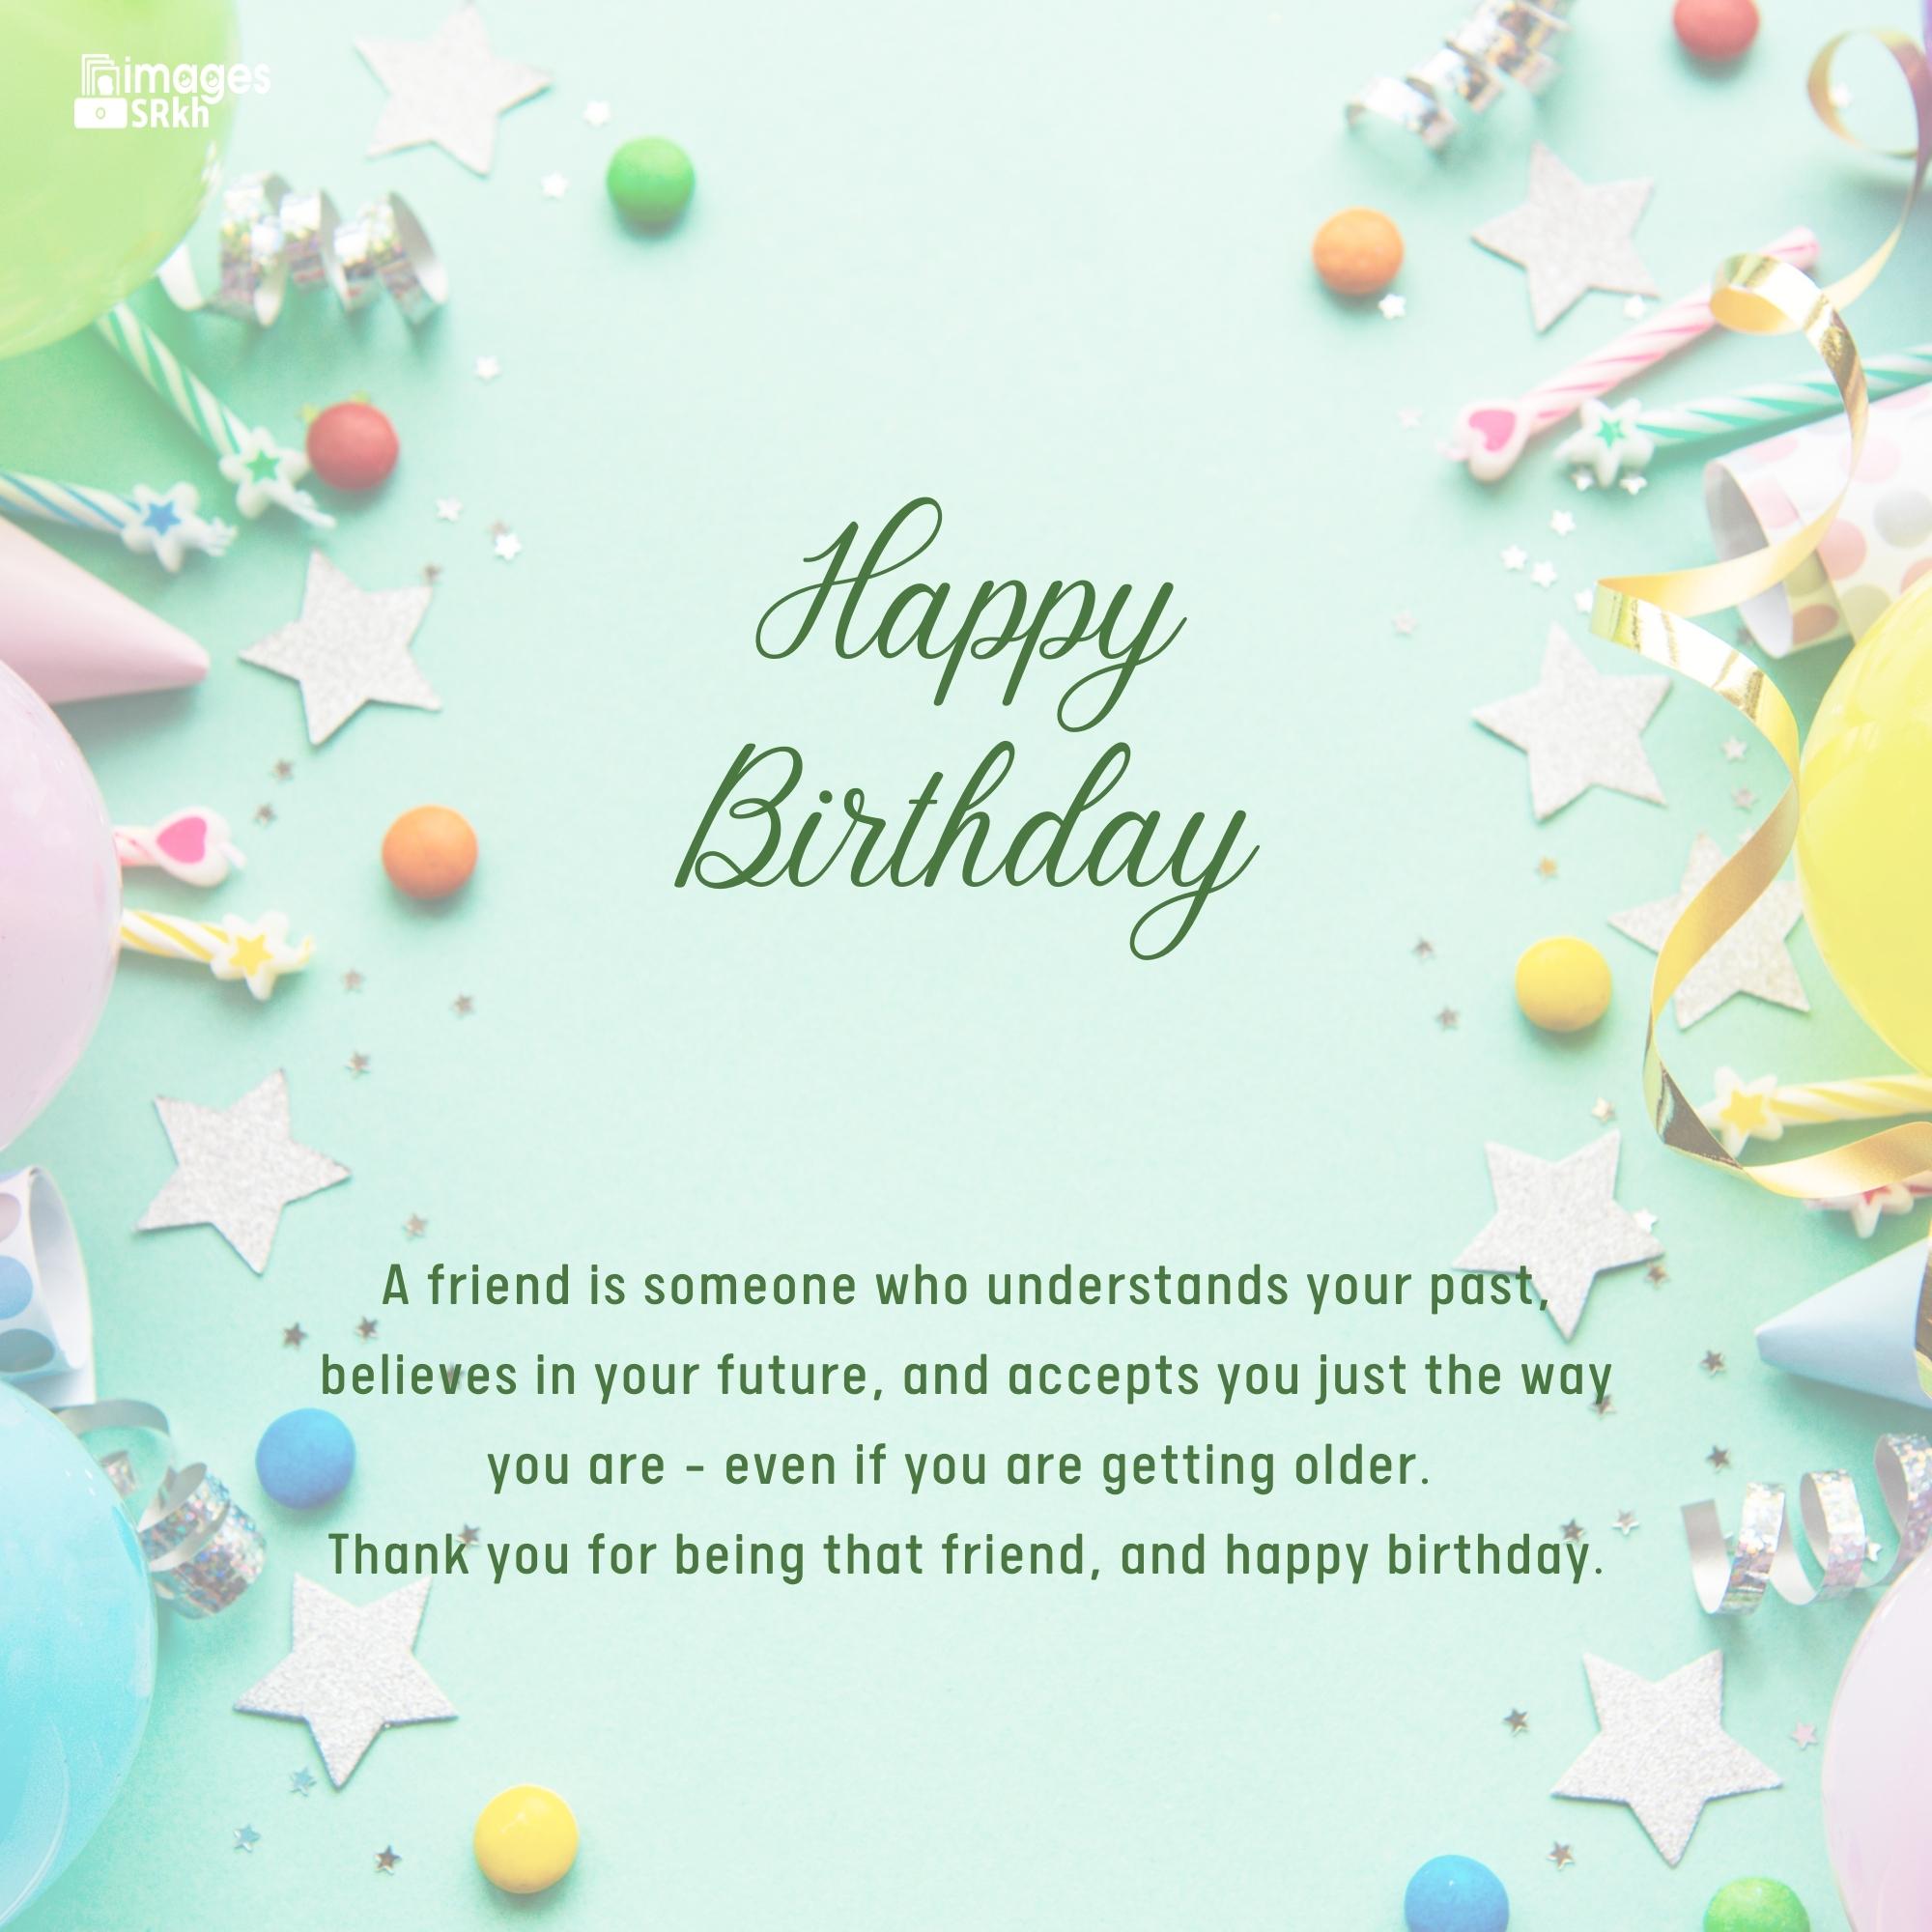 Happy Birthday Images For Friends Hd Premium Qulity